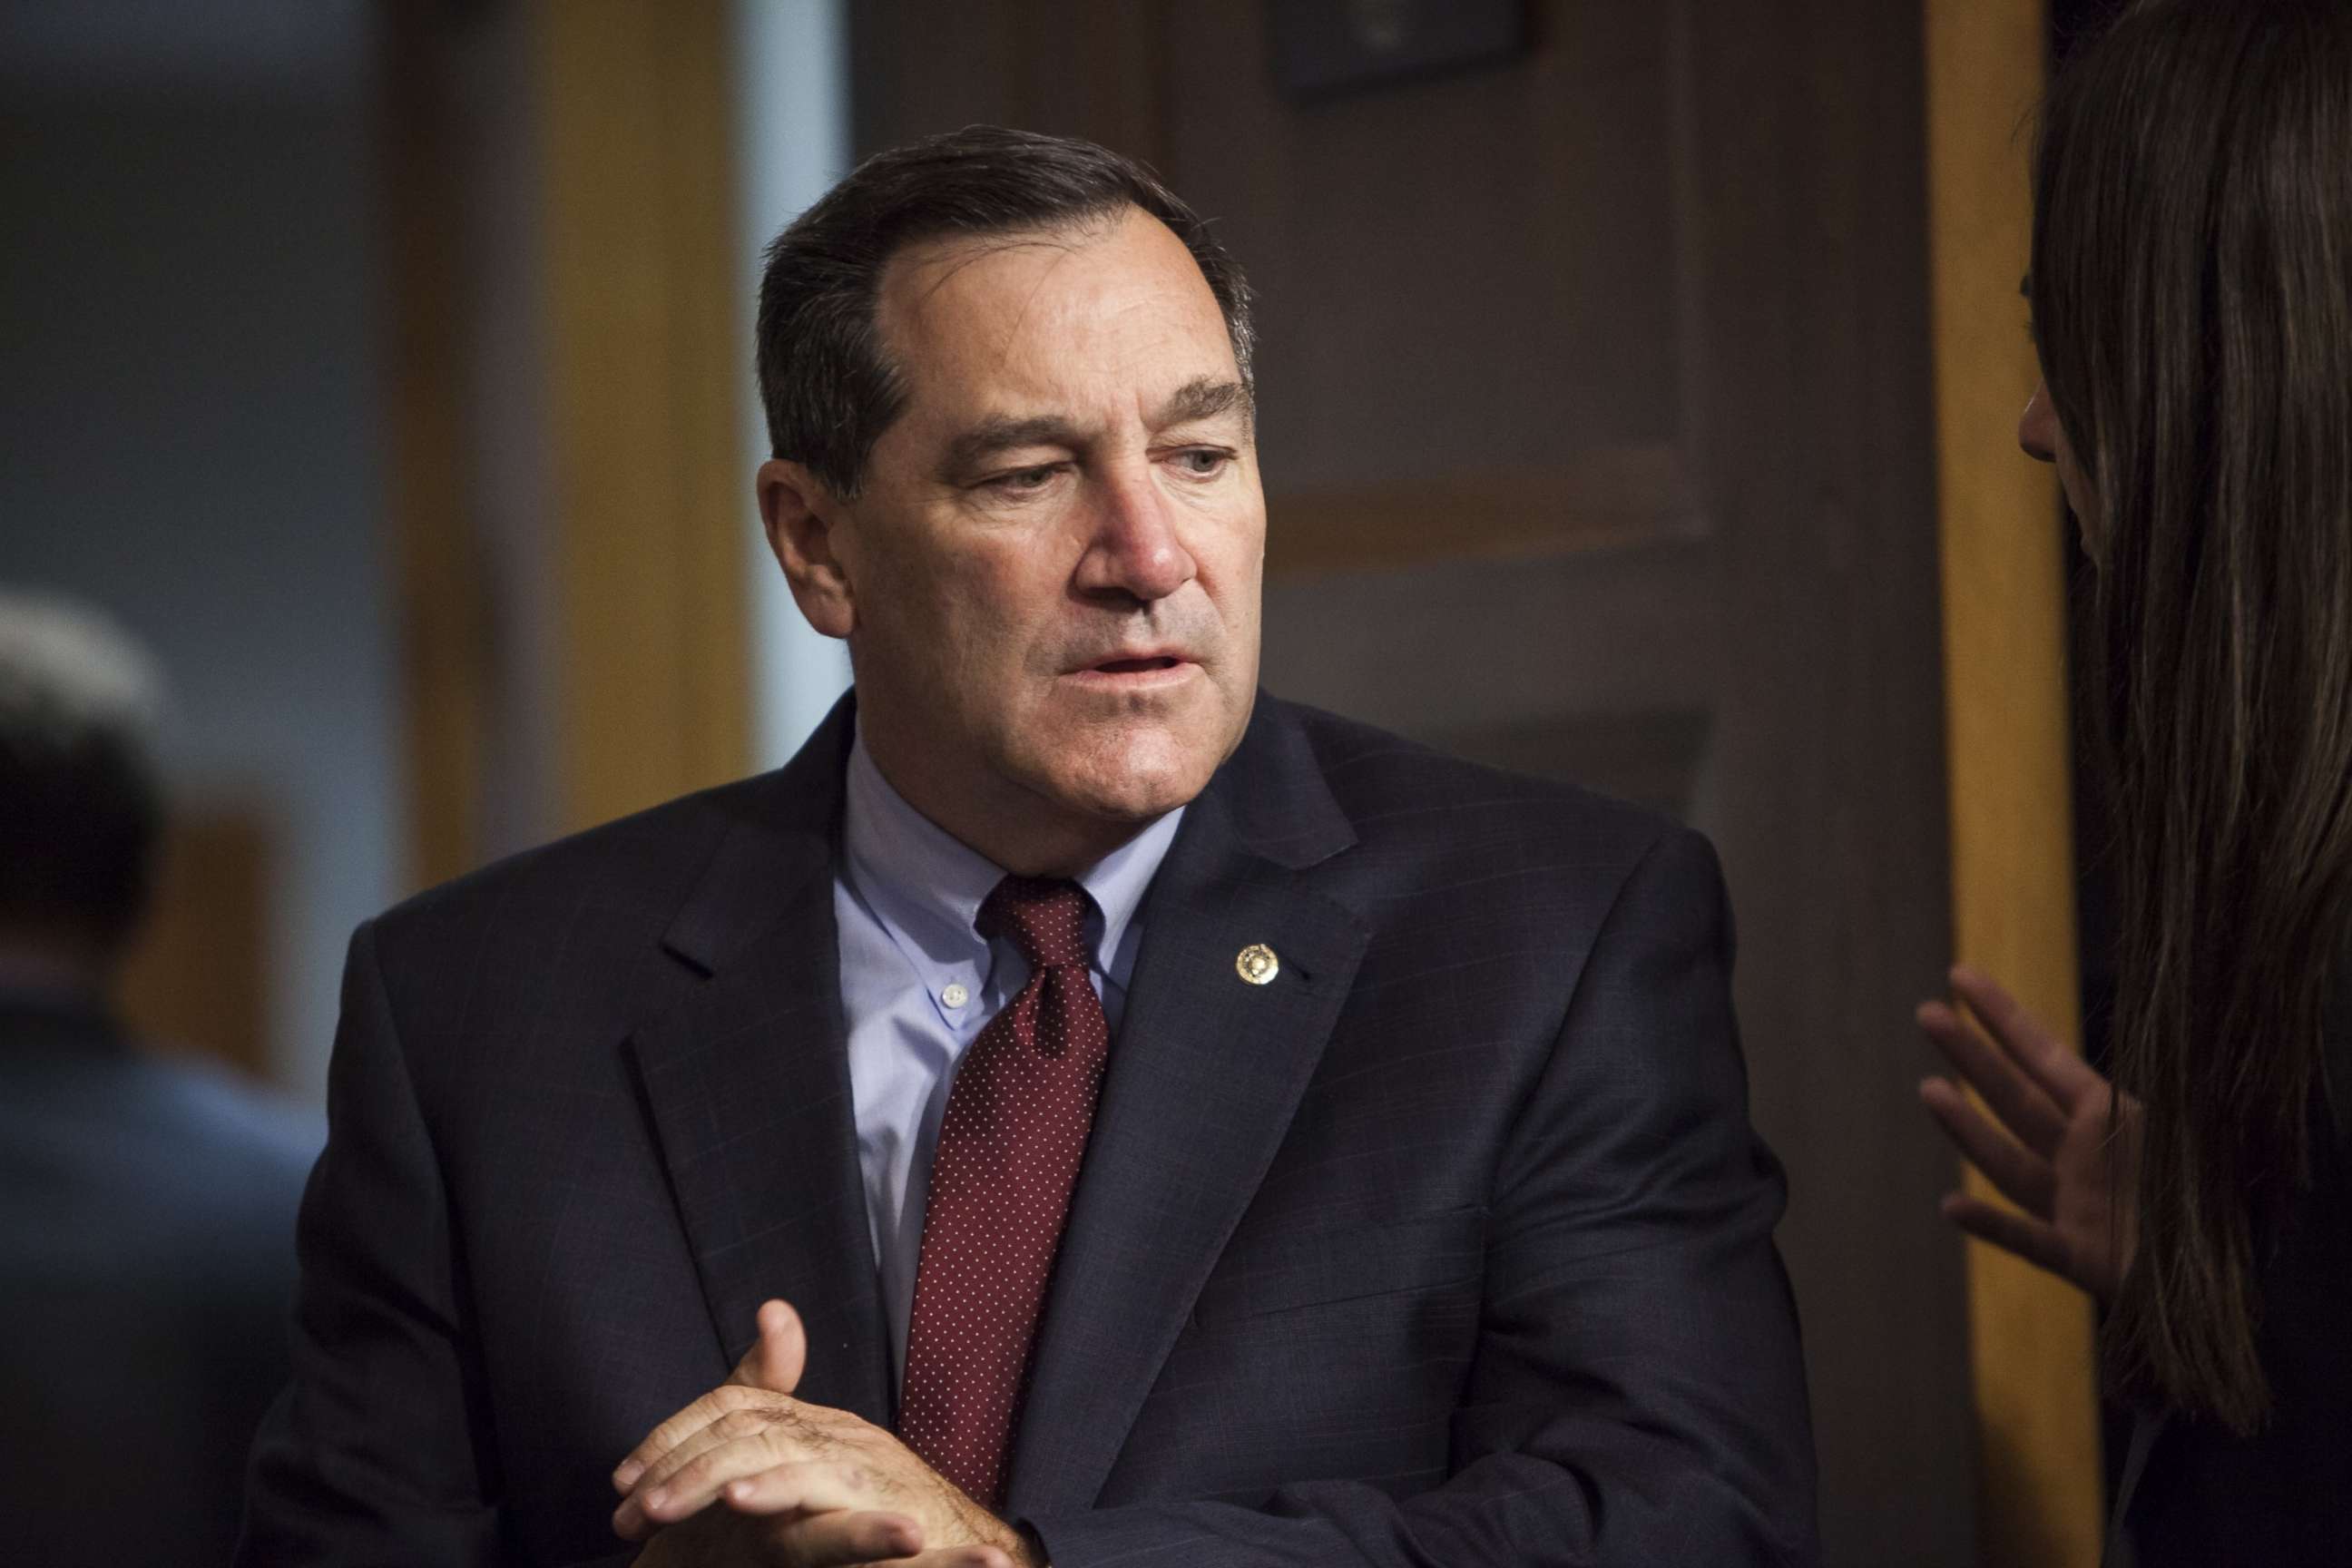 PHOTO: Sen. Joe Donnelly enters the hearing chamber before a Senate Armed Services Committee hearing on Counter-ISIL Strategy in Washington, July 7, 2015.